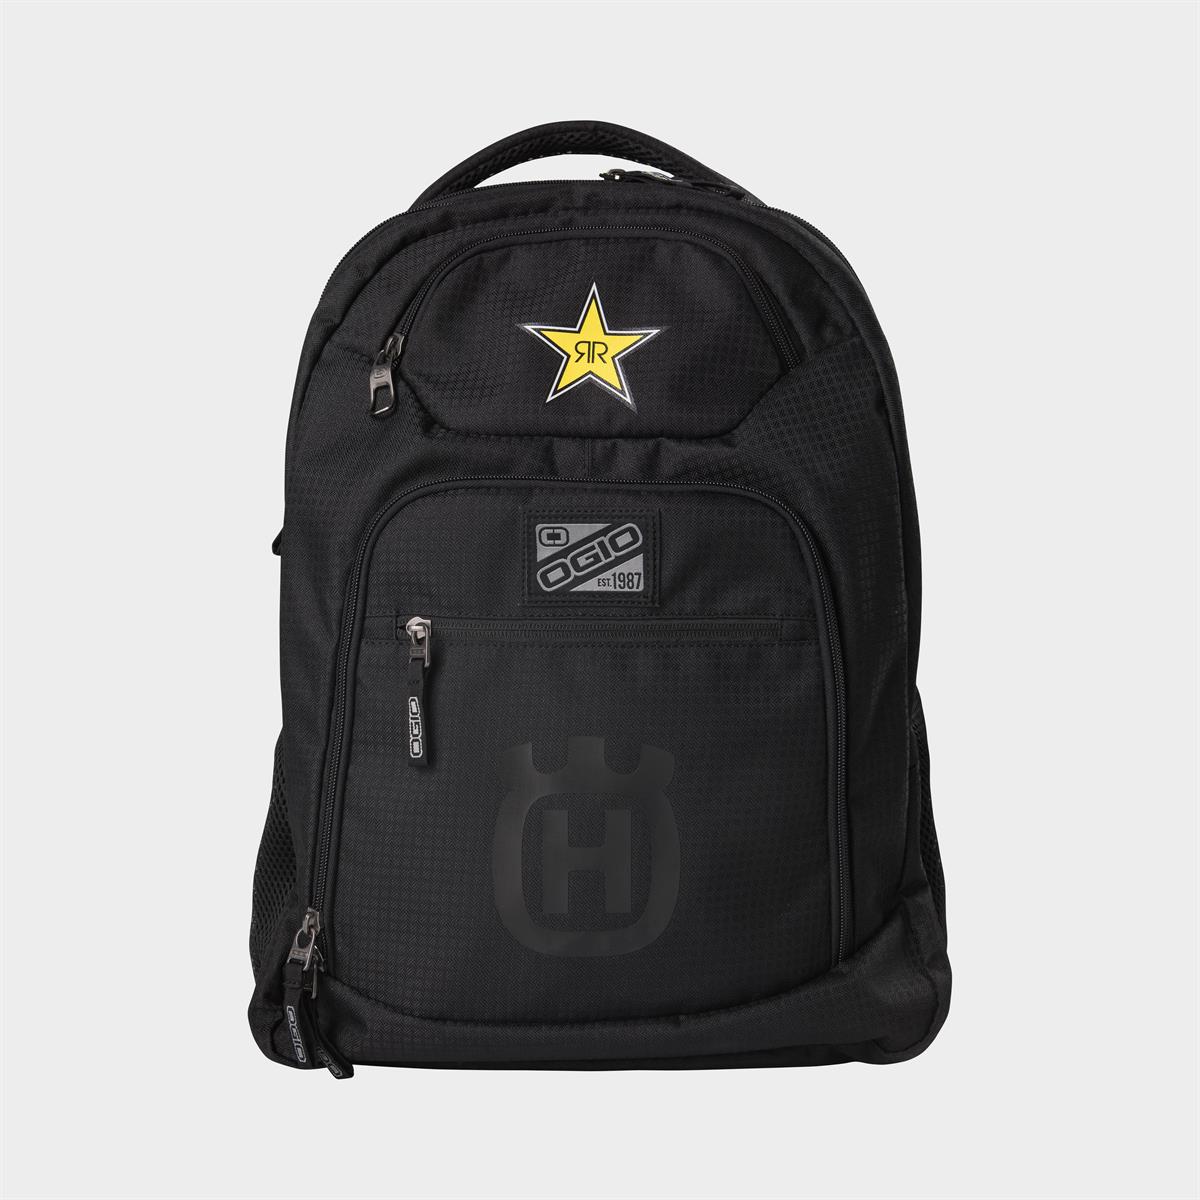 Rockstar Energy Husqvarna Factory Racing Lifestyle Collection Factory Team Backpack